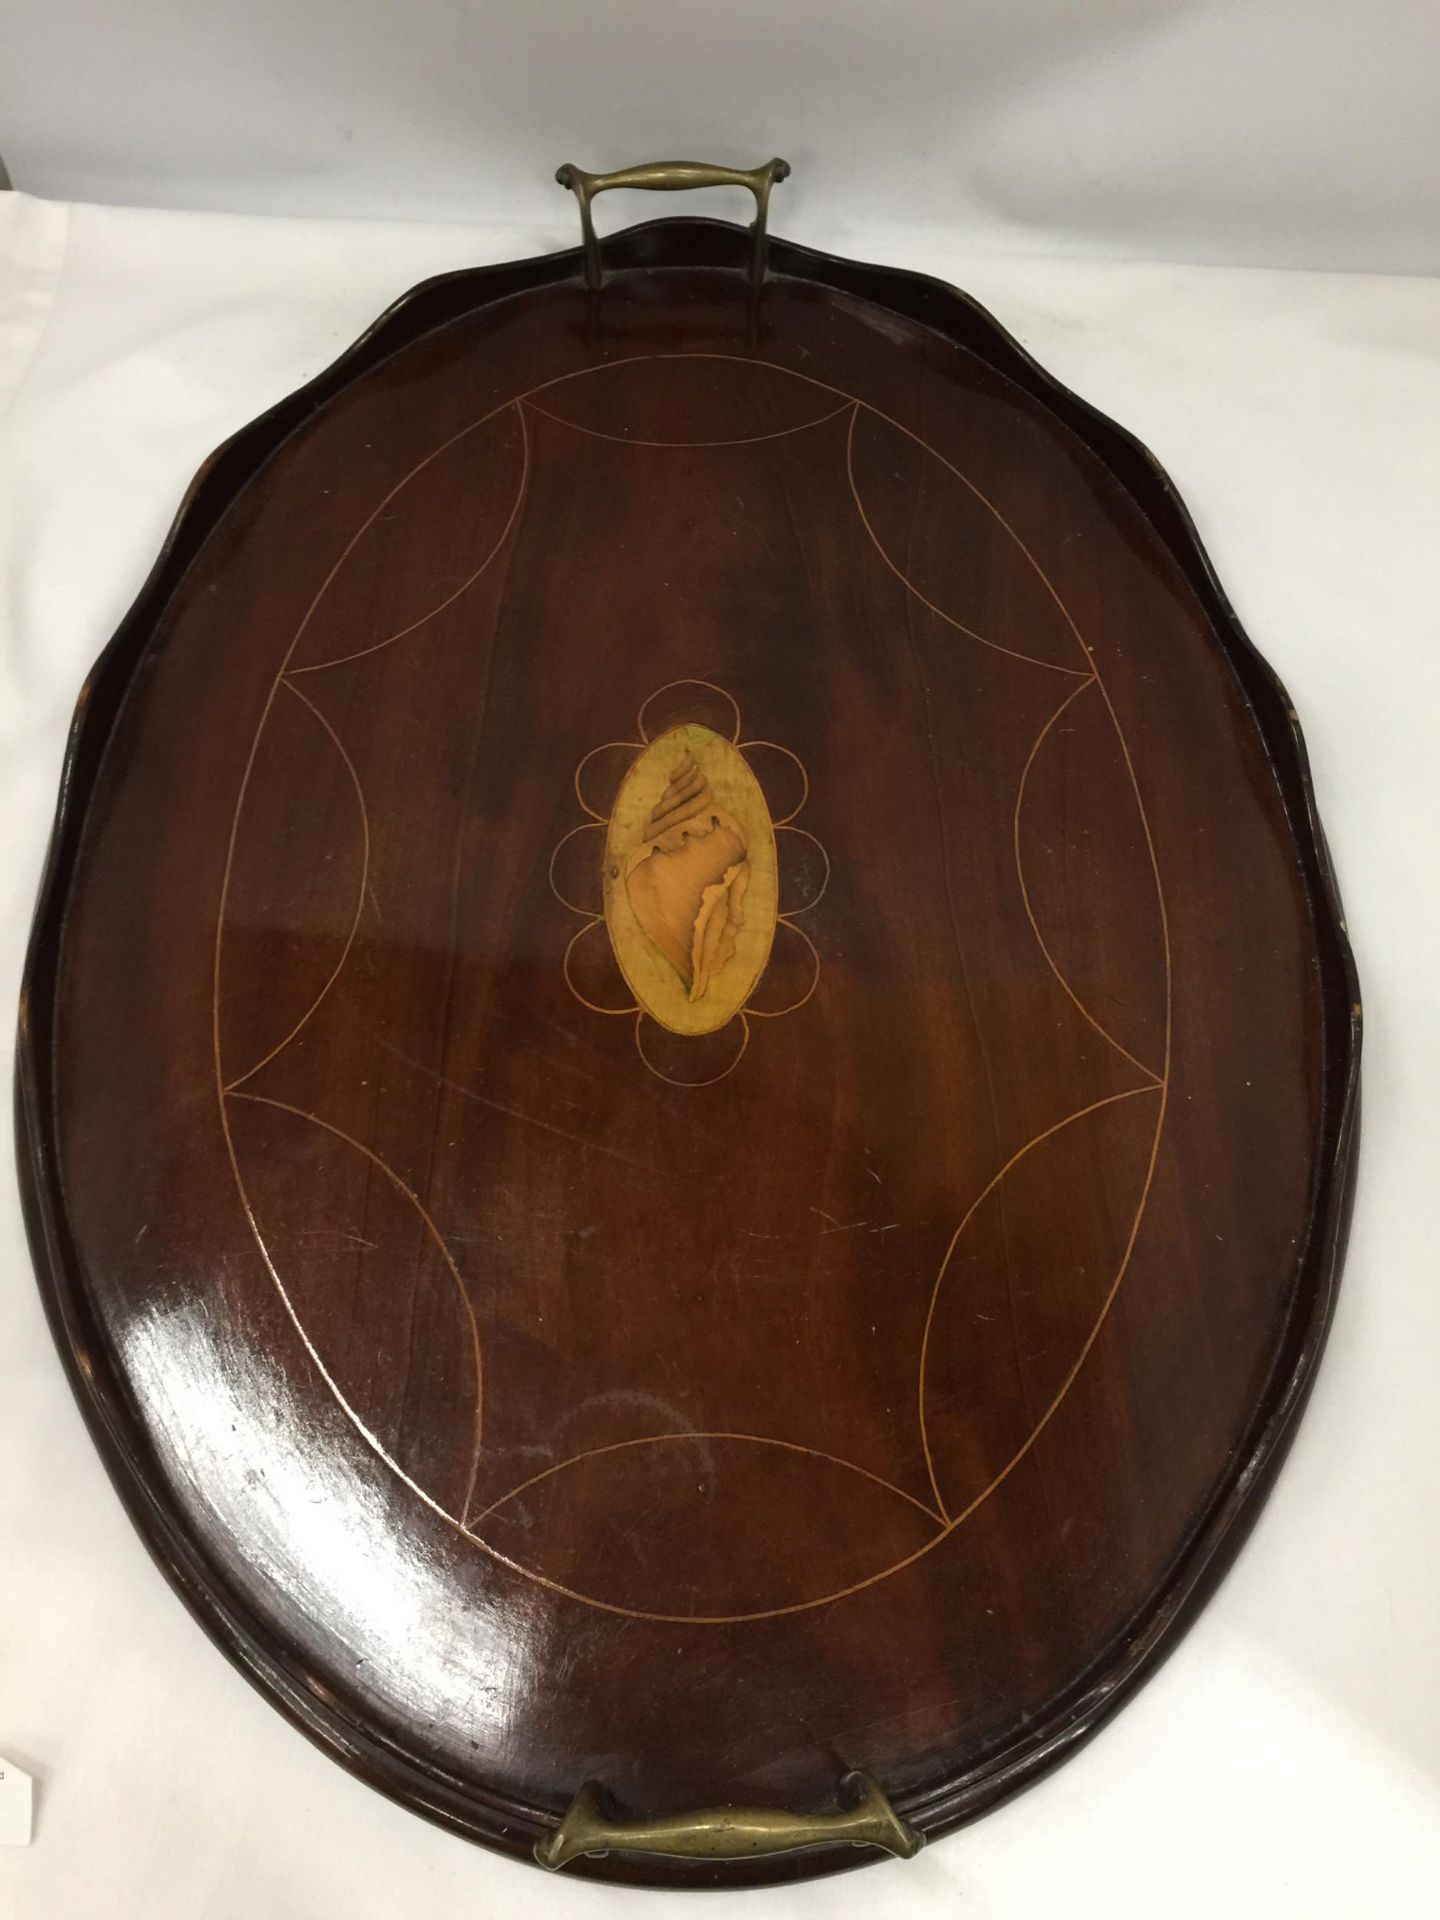 AN EDWARDIAN MAHOGANY BUTLERS DRINKS TRAY WITH INLAID CONCH SHELL DESIGN - Image 2 of 3